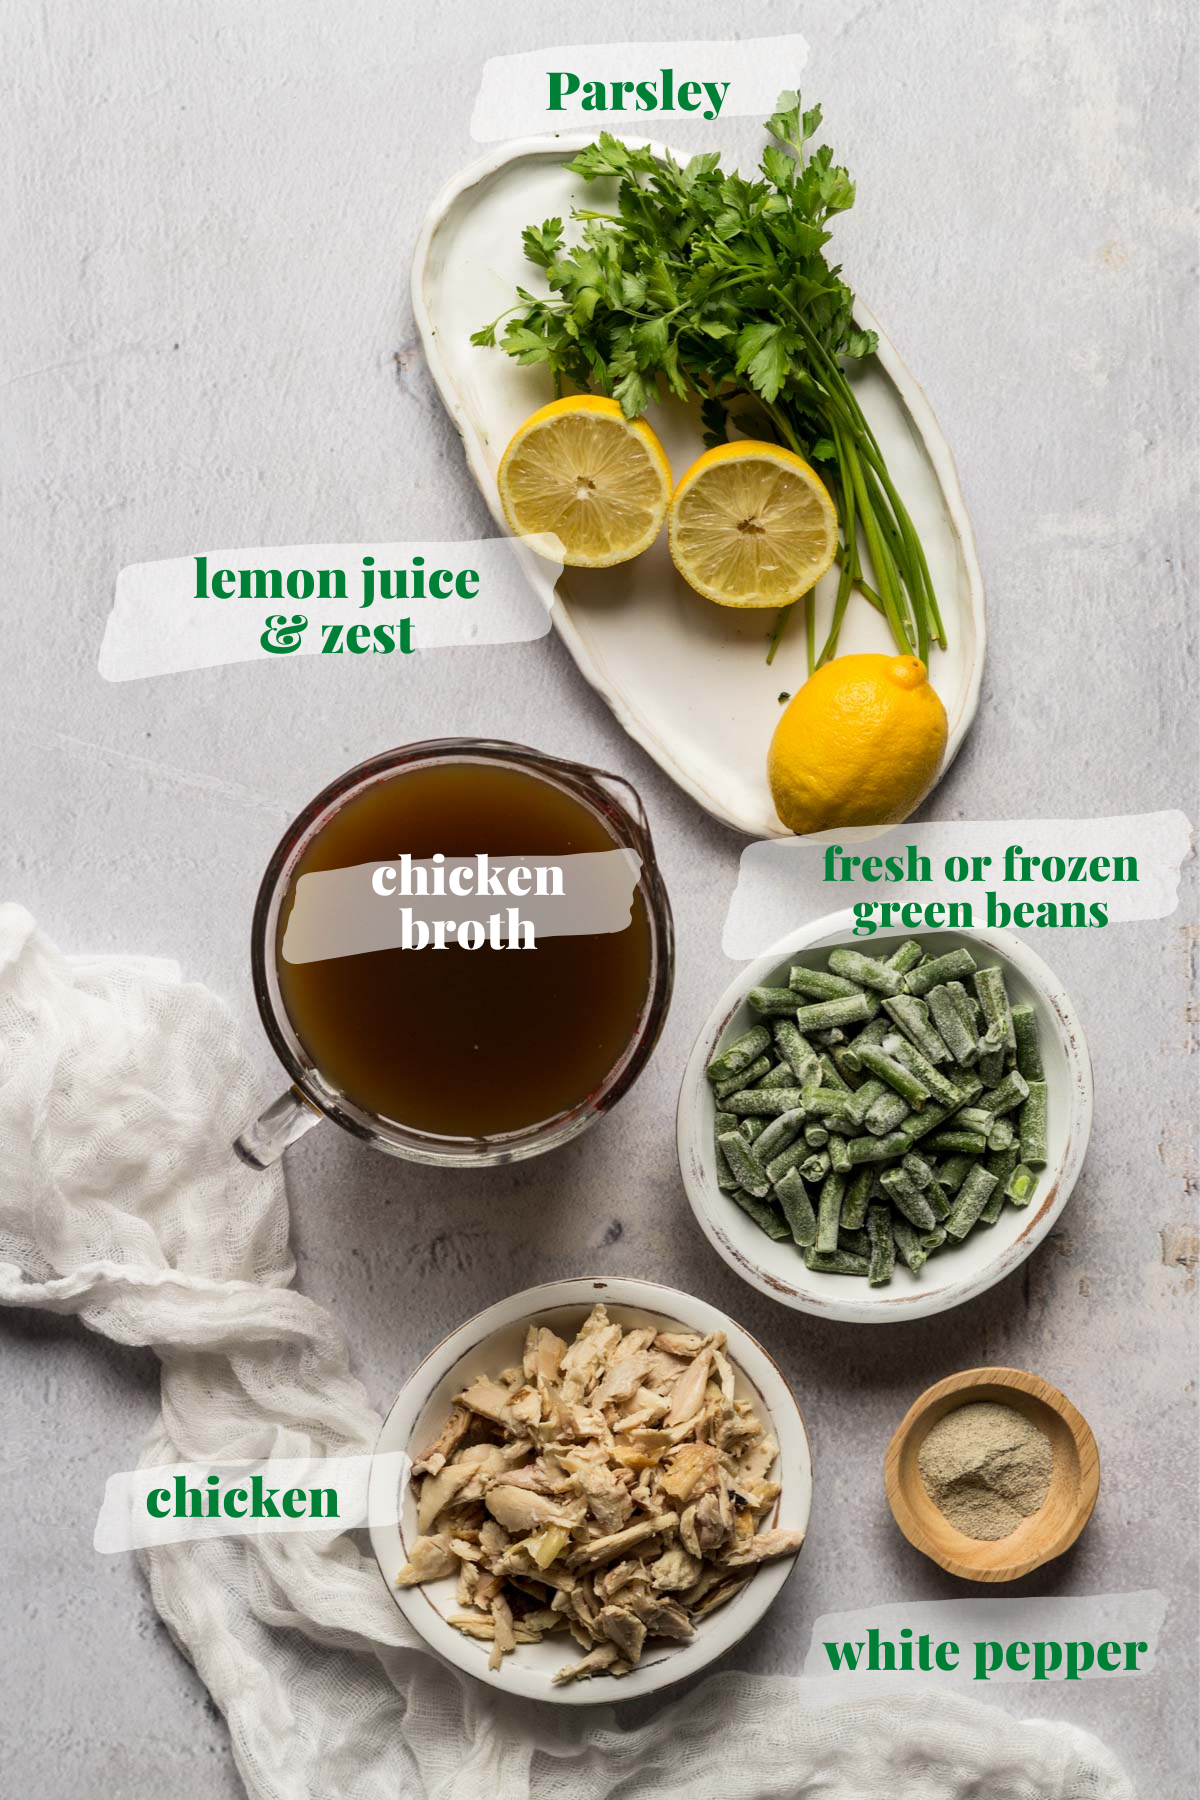 Lemons, parsley, broth, chicken, and green beans in bowls